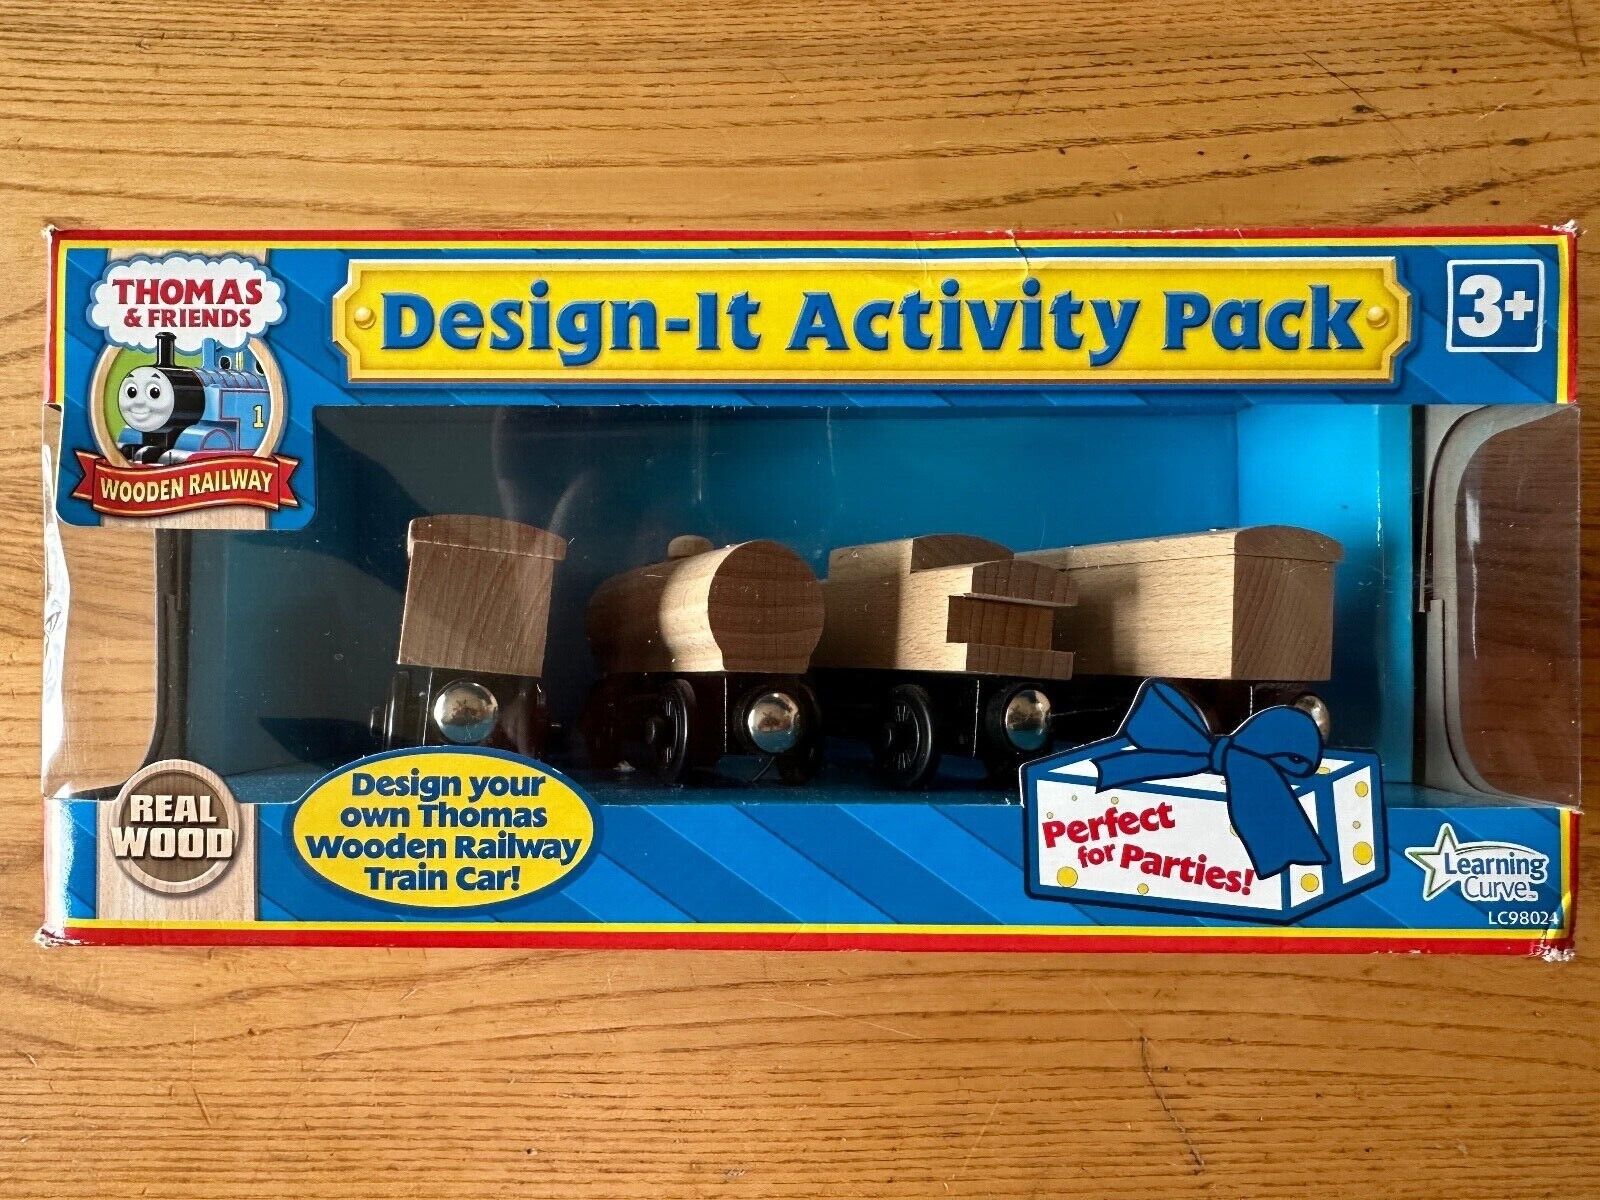 Thomas & Friends Wooden Railway Train Design-It Activity Pack  - New-in-Box